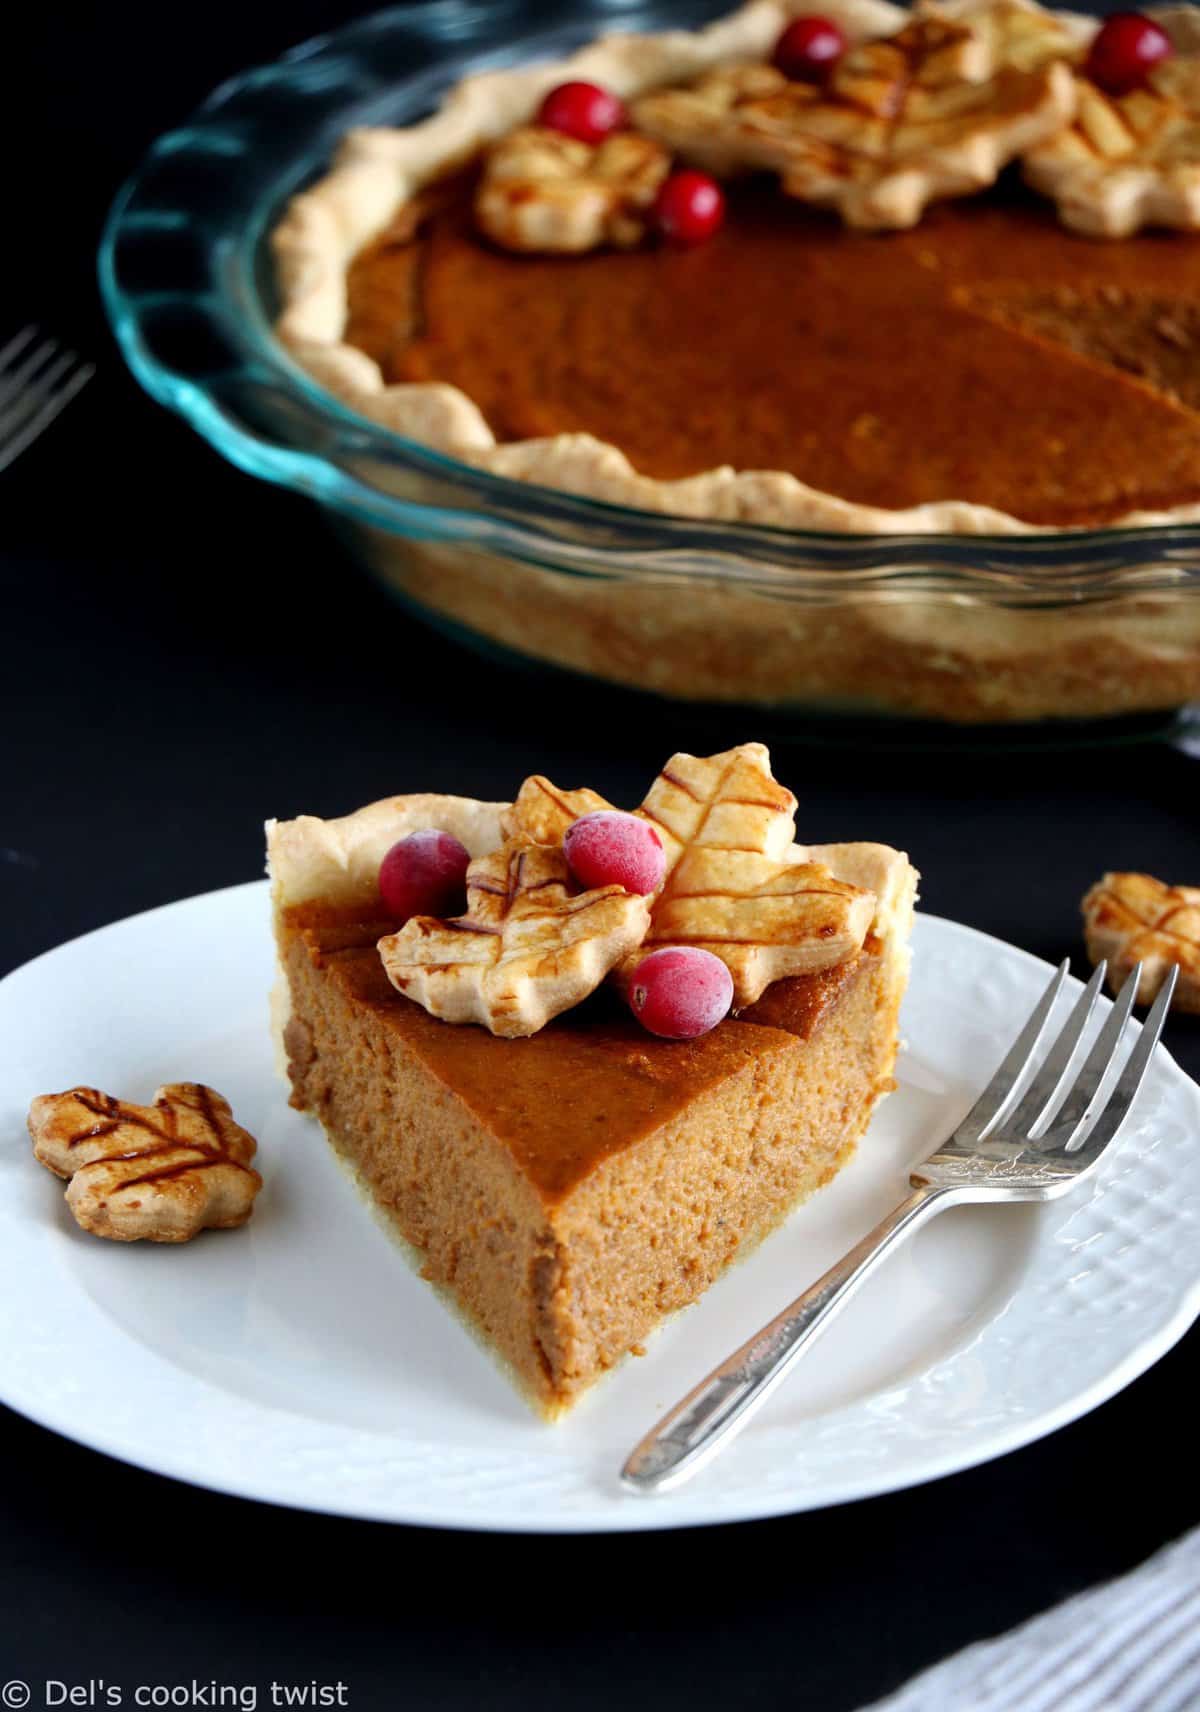 This classic pumpkin pie recipe features a flaky pie crust and a smooth pumpkin filling bursting with pumpkin spice flavors. Using wholesome ingredients only, it's the ultimate Thanksgiving dessert!